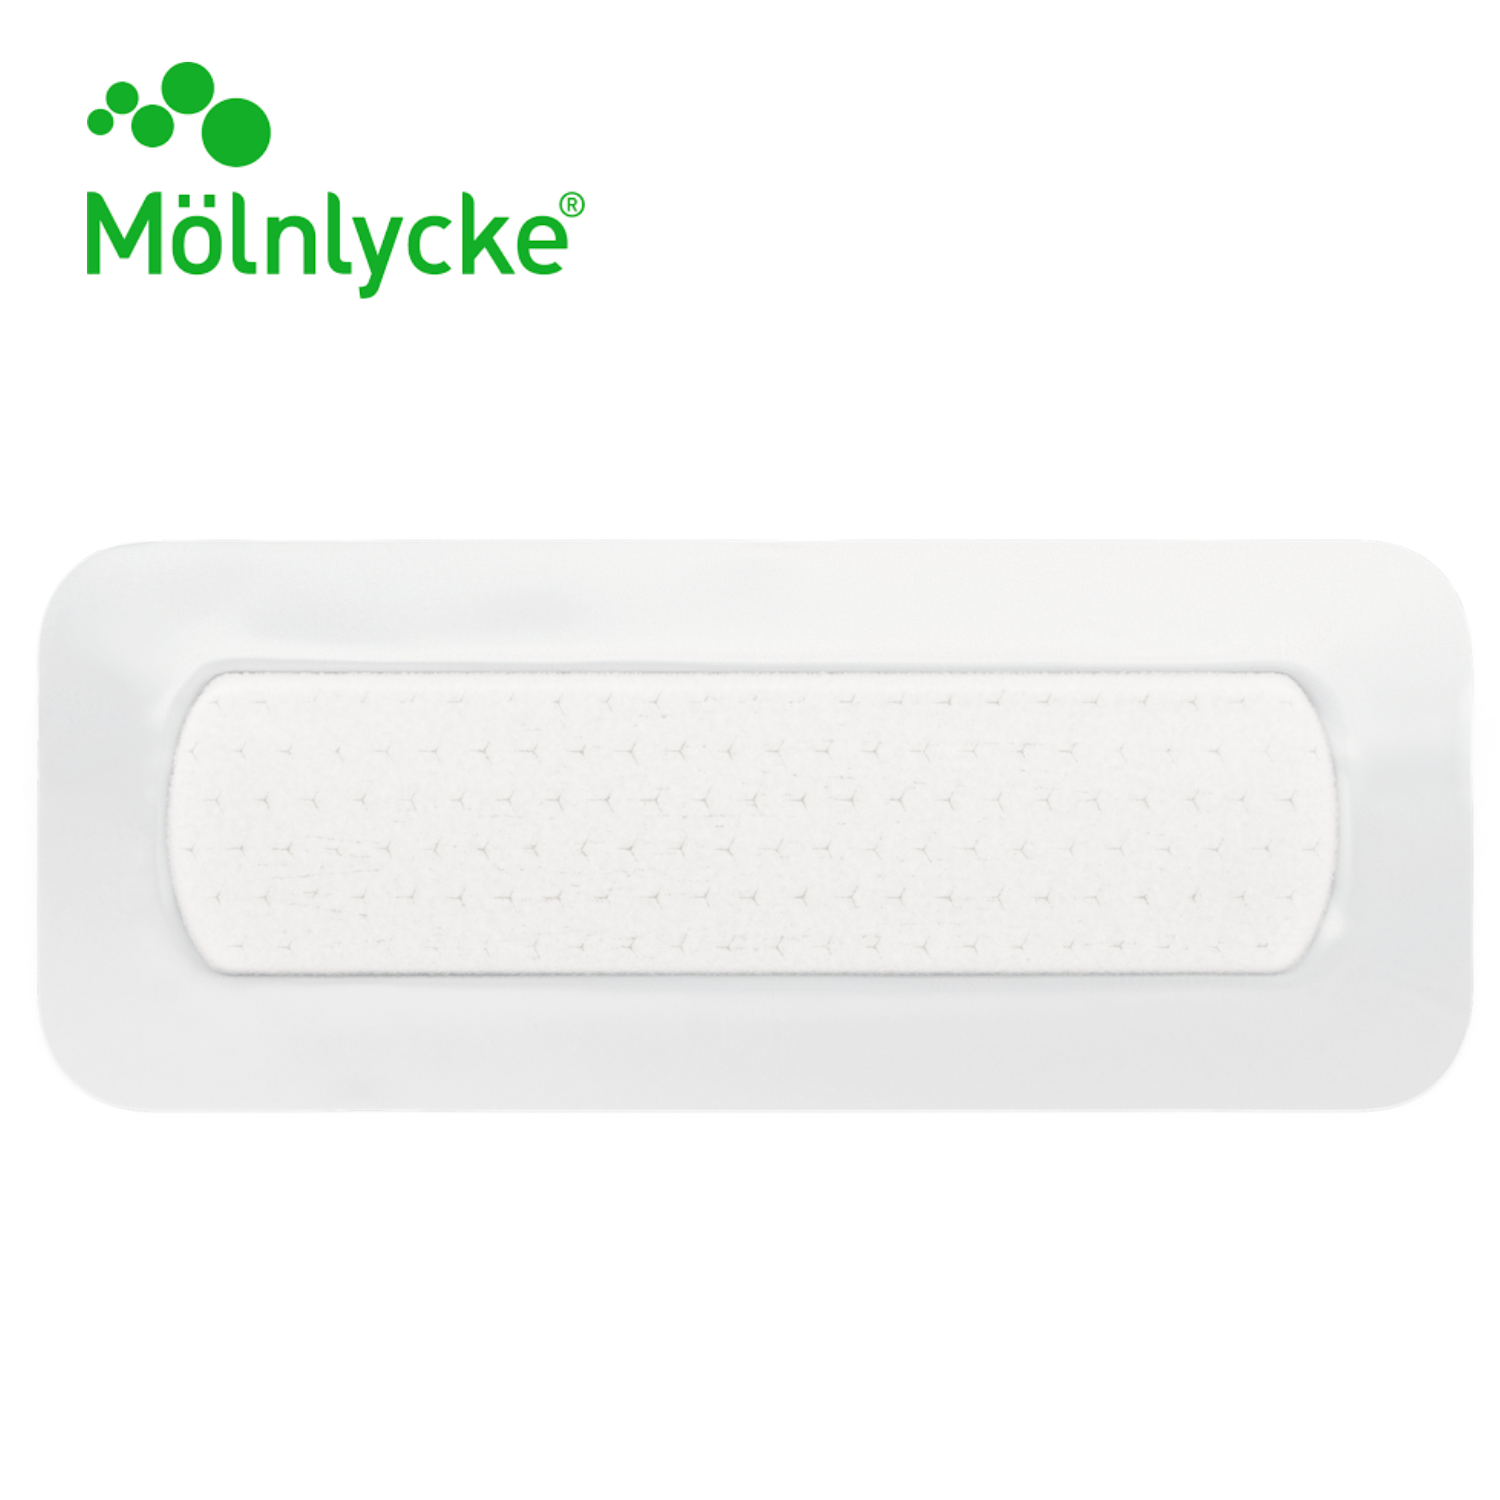 Molnlycke Products (18)